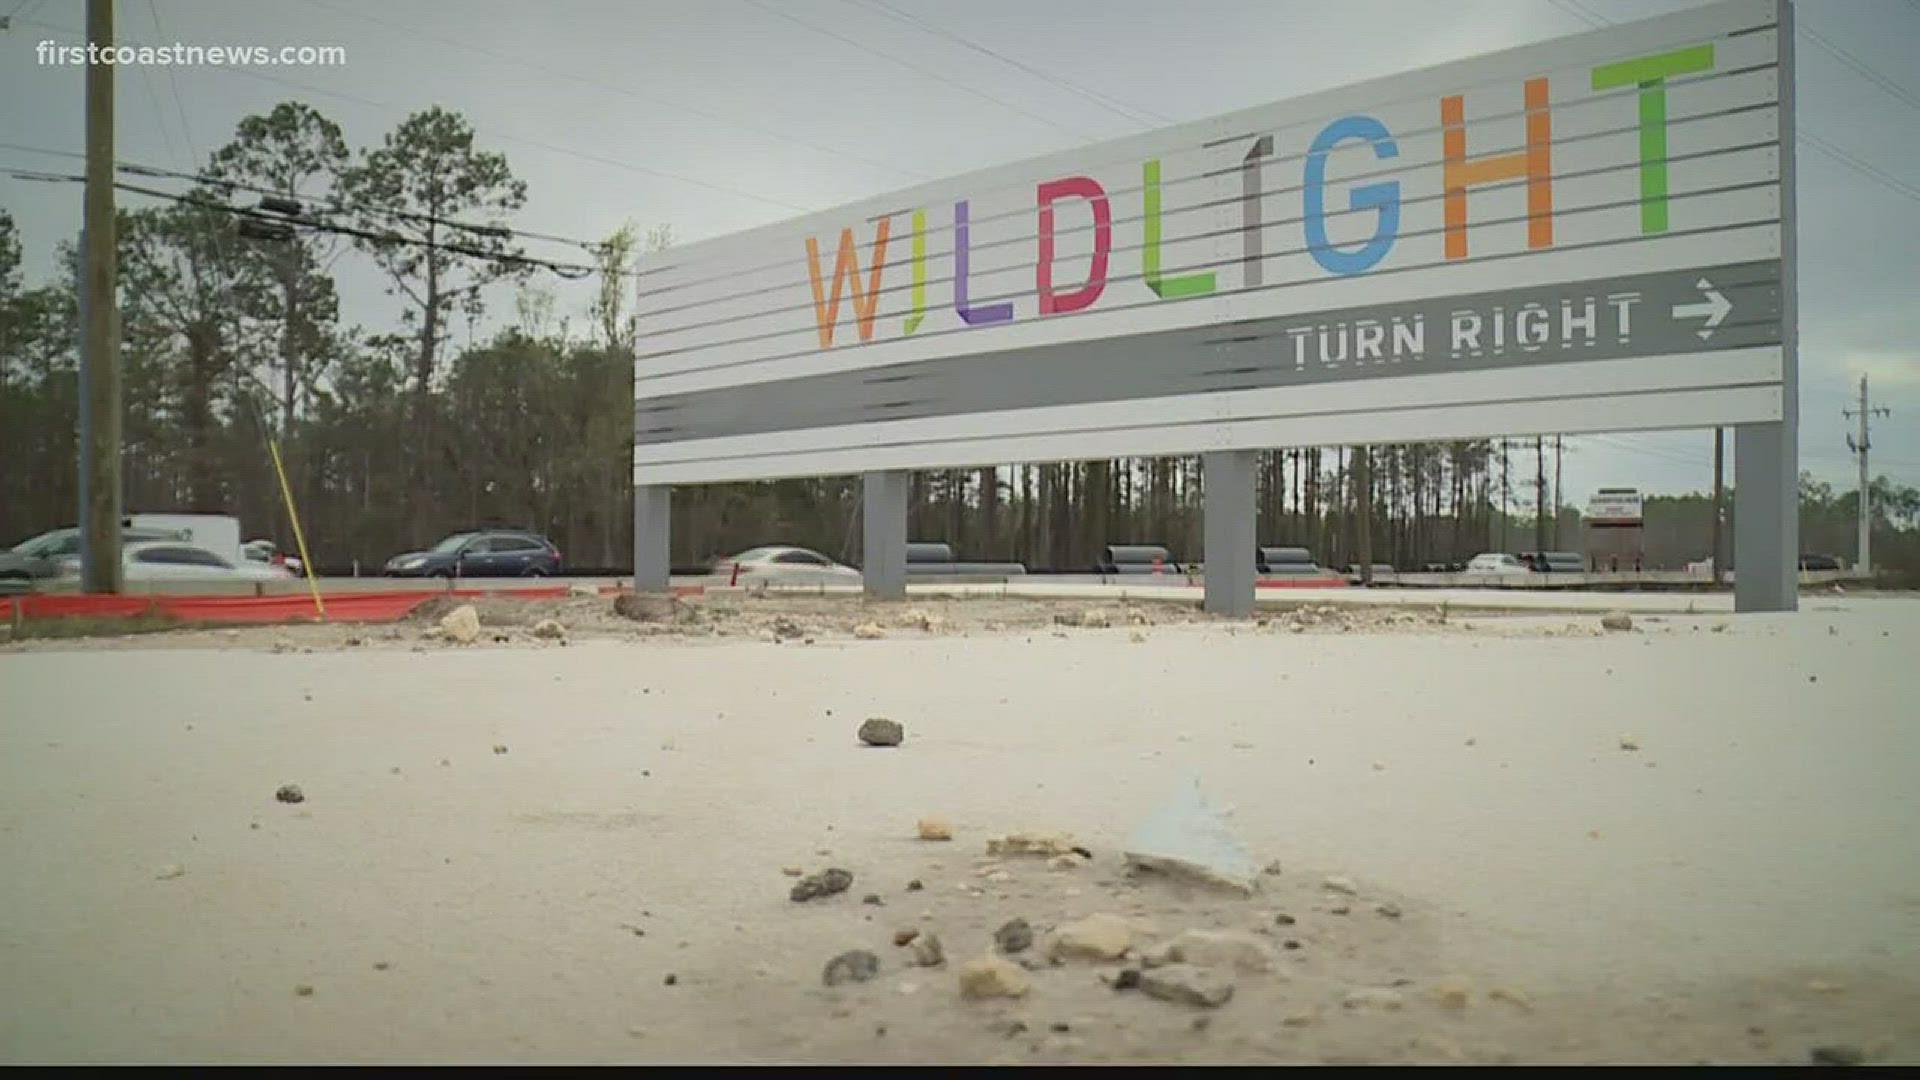 In the heart of Nassau County, near I-95 and A1A, a posh new development known as Wildlight is at the center of a debate brewing in Tallahassee.